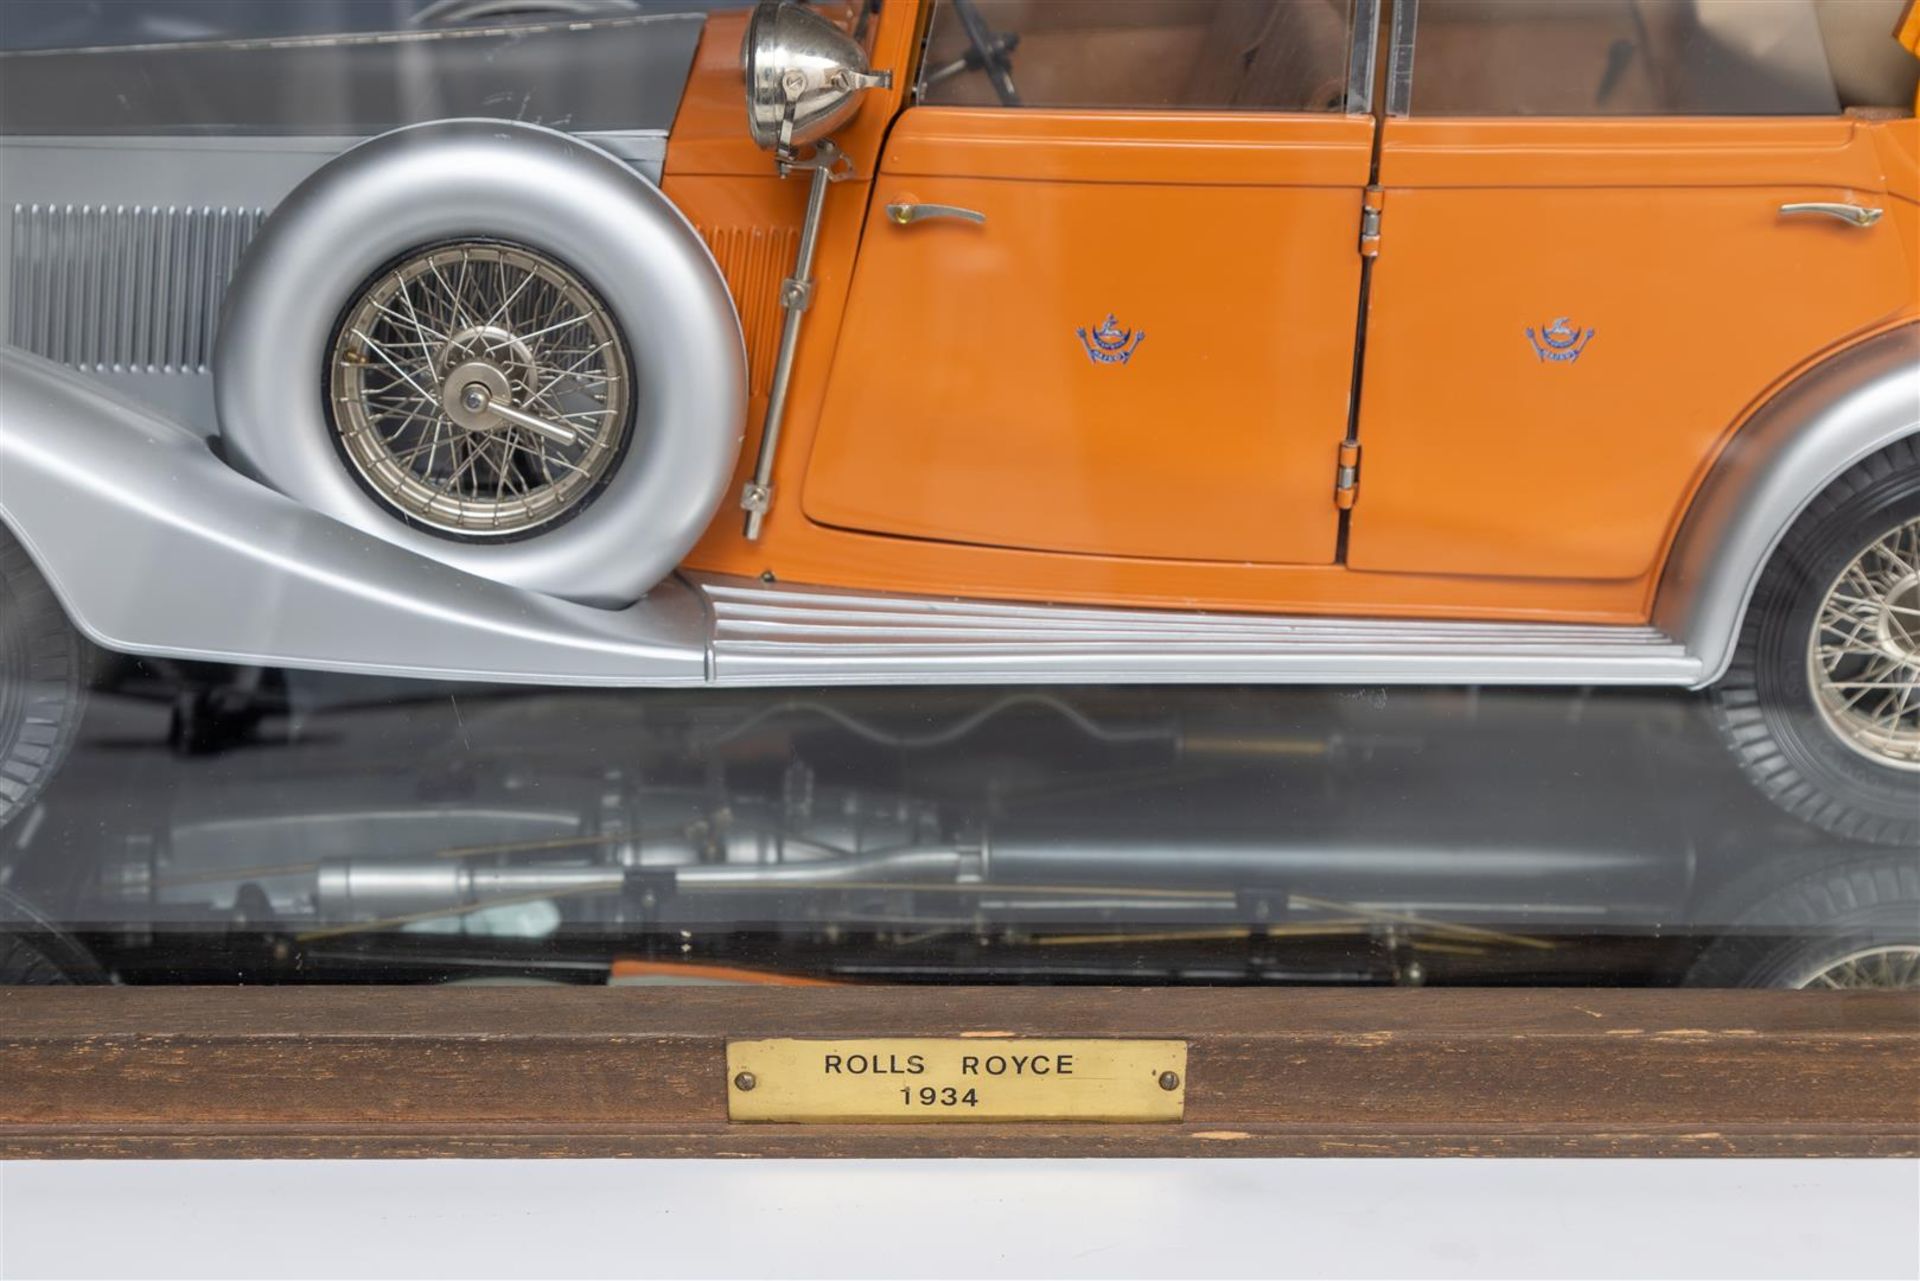 A scale model of a 1937 Rolls Royce. - Image 3 of 6